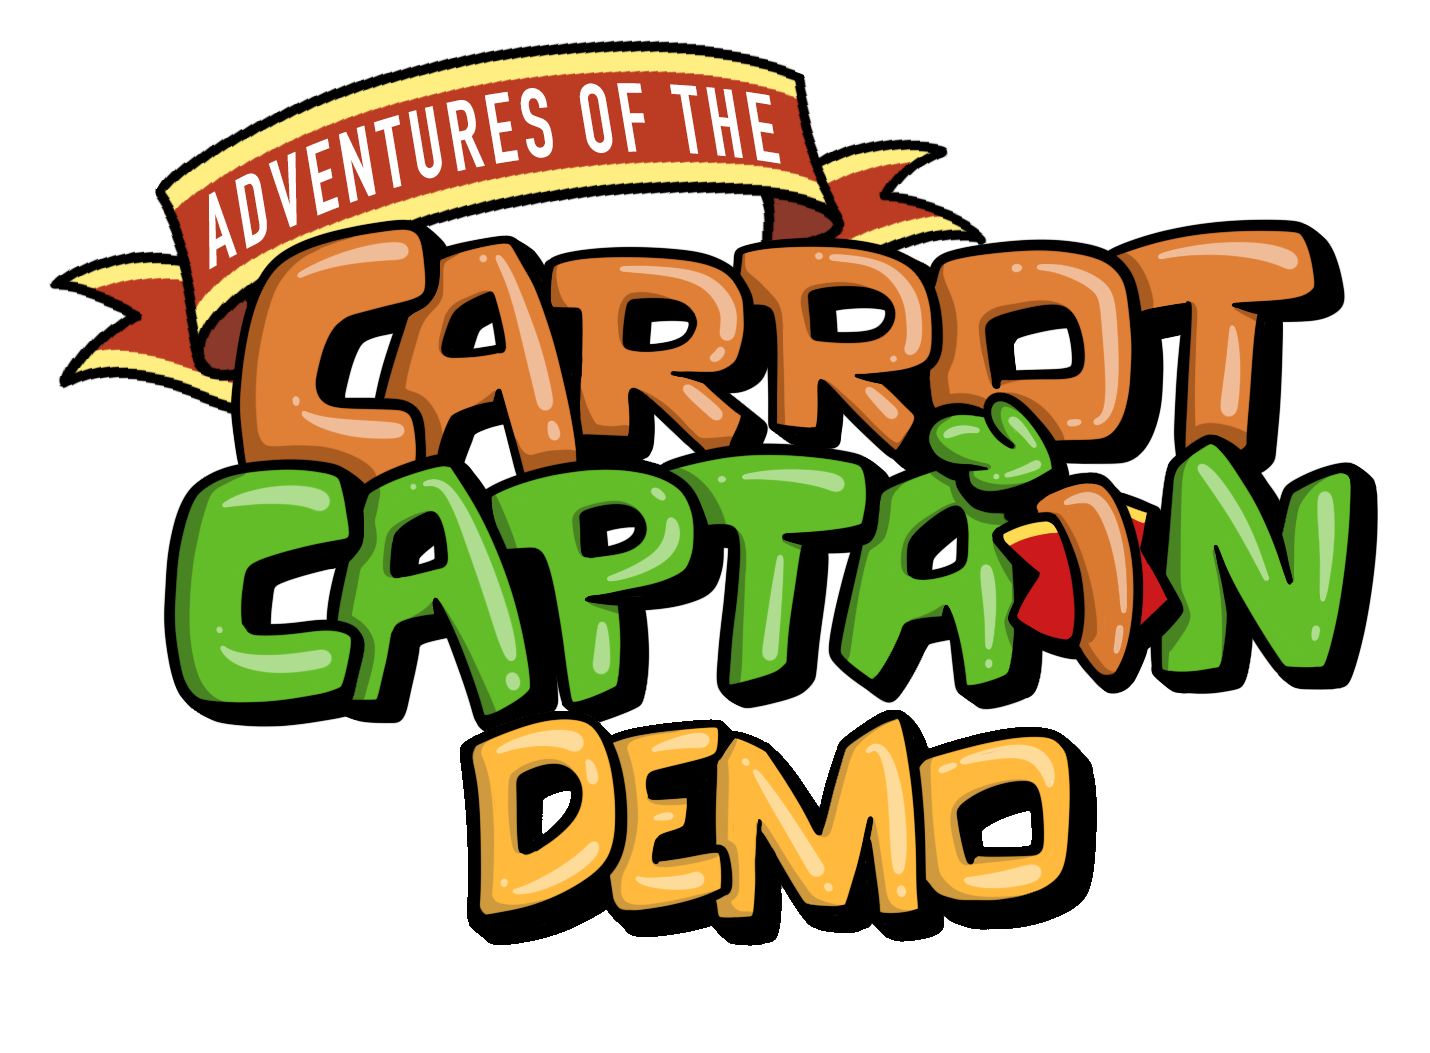 The Adventures of the Carrot Captain Demo